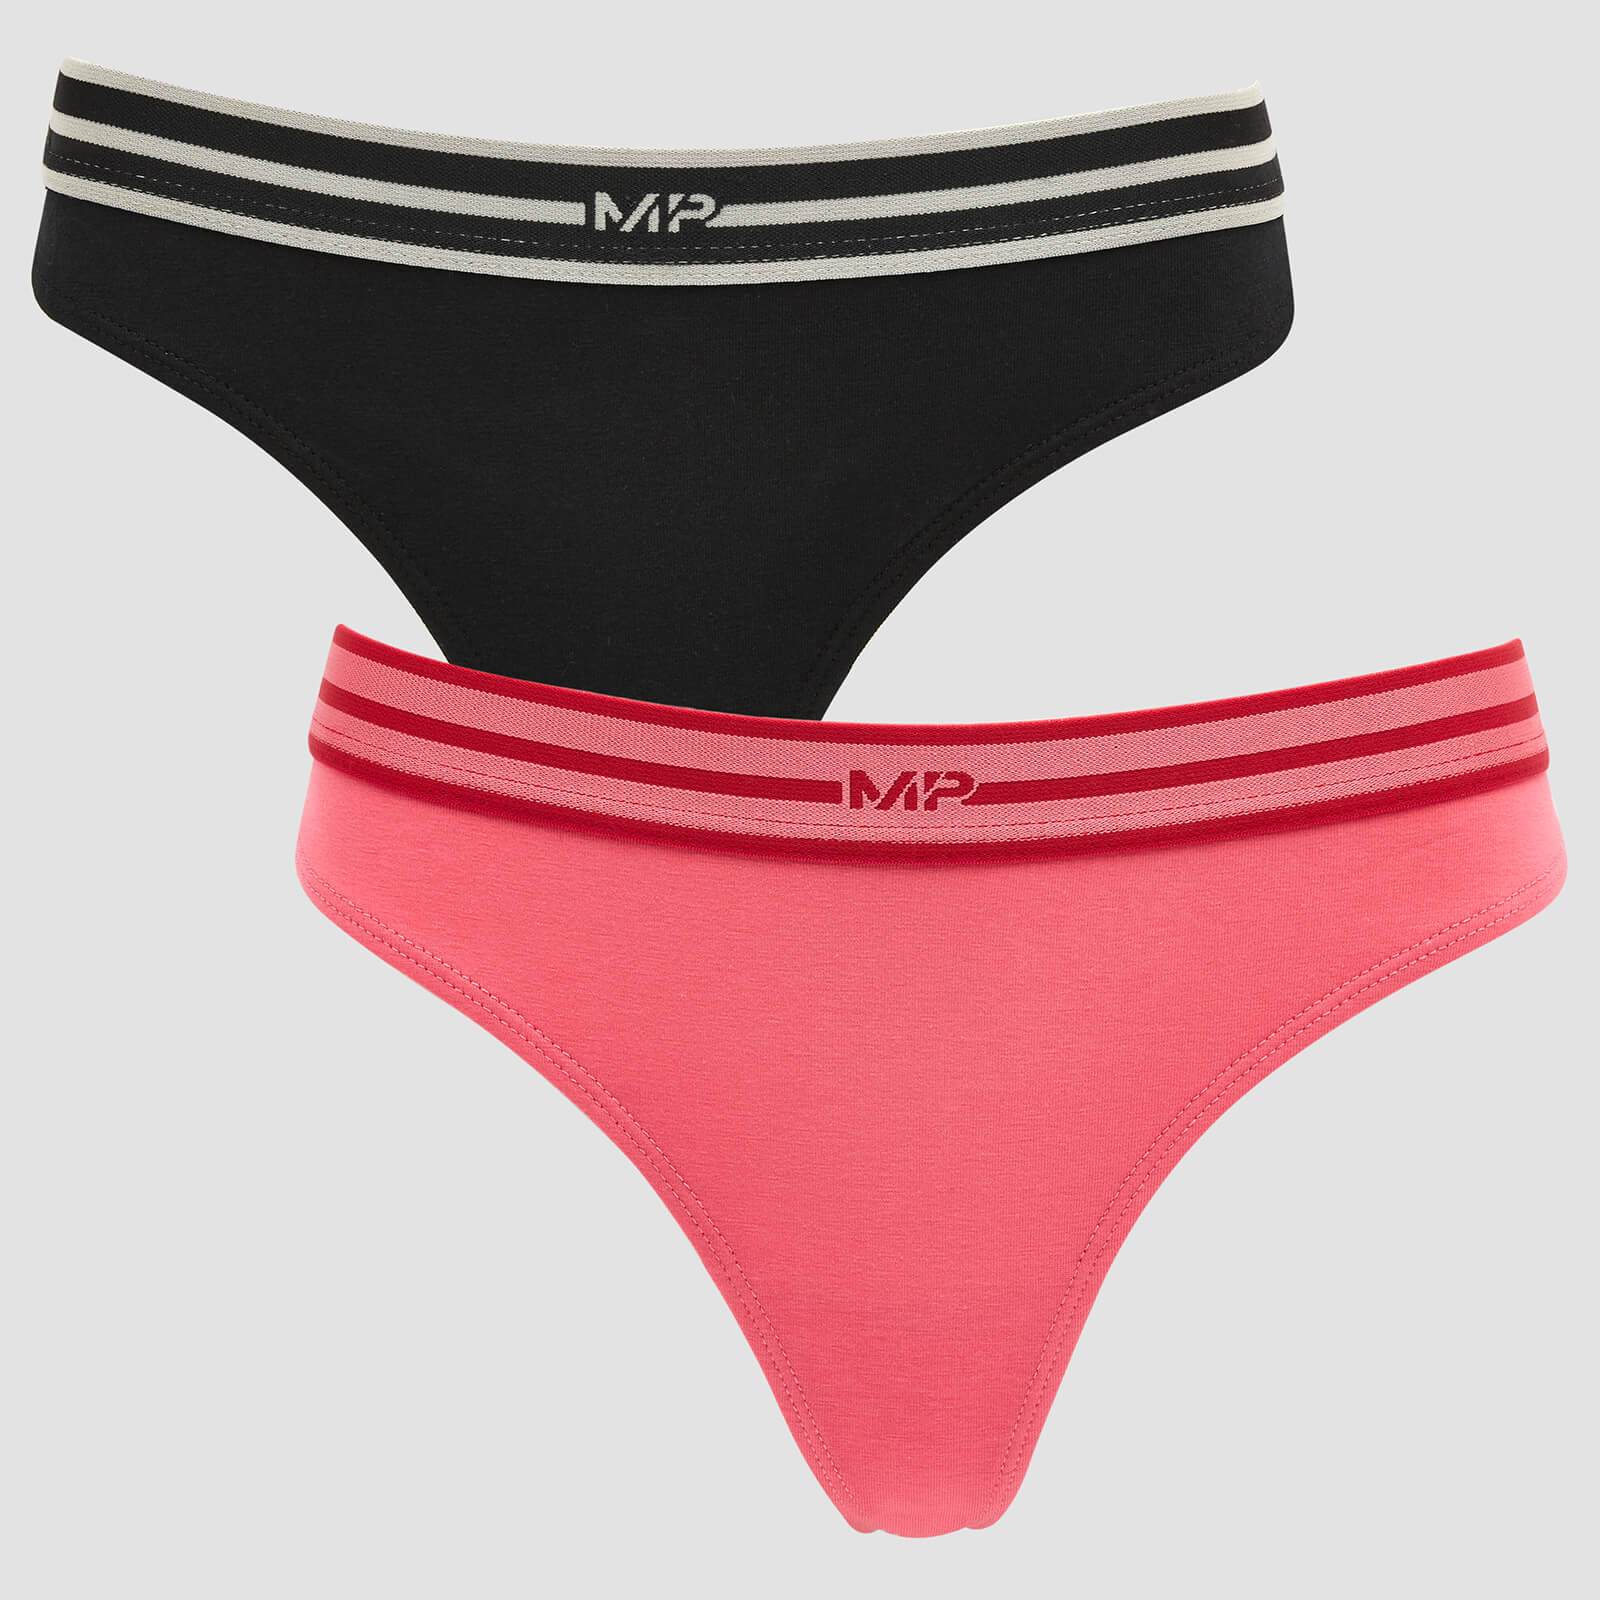 MP Women's Limited Edition Impact Essentials Thong (2 Pack) - Black/Pink - XXS